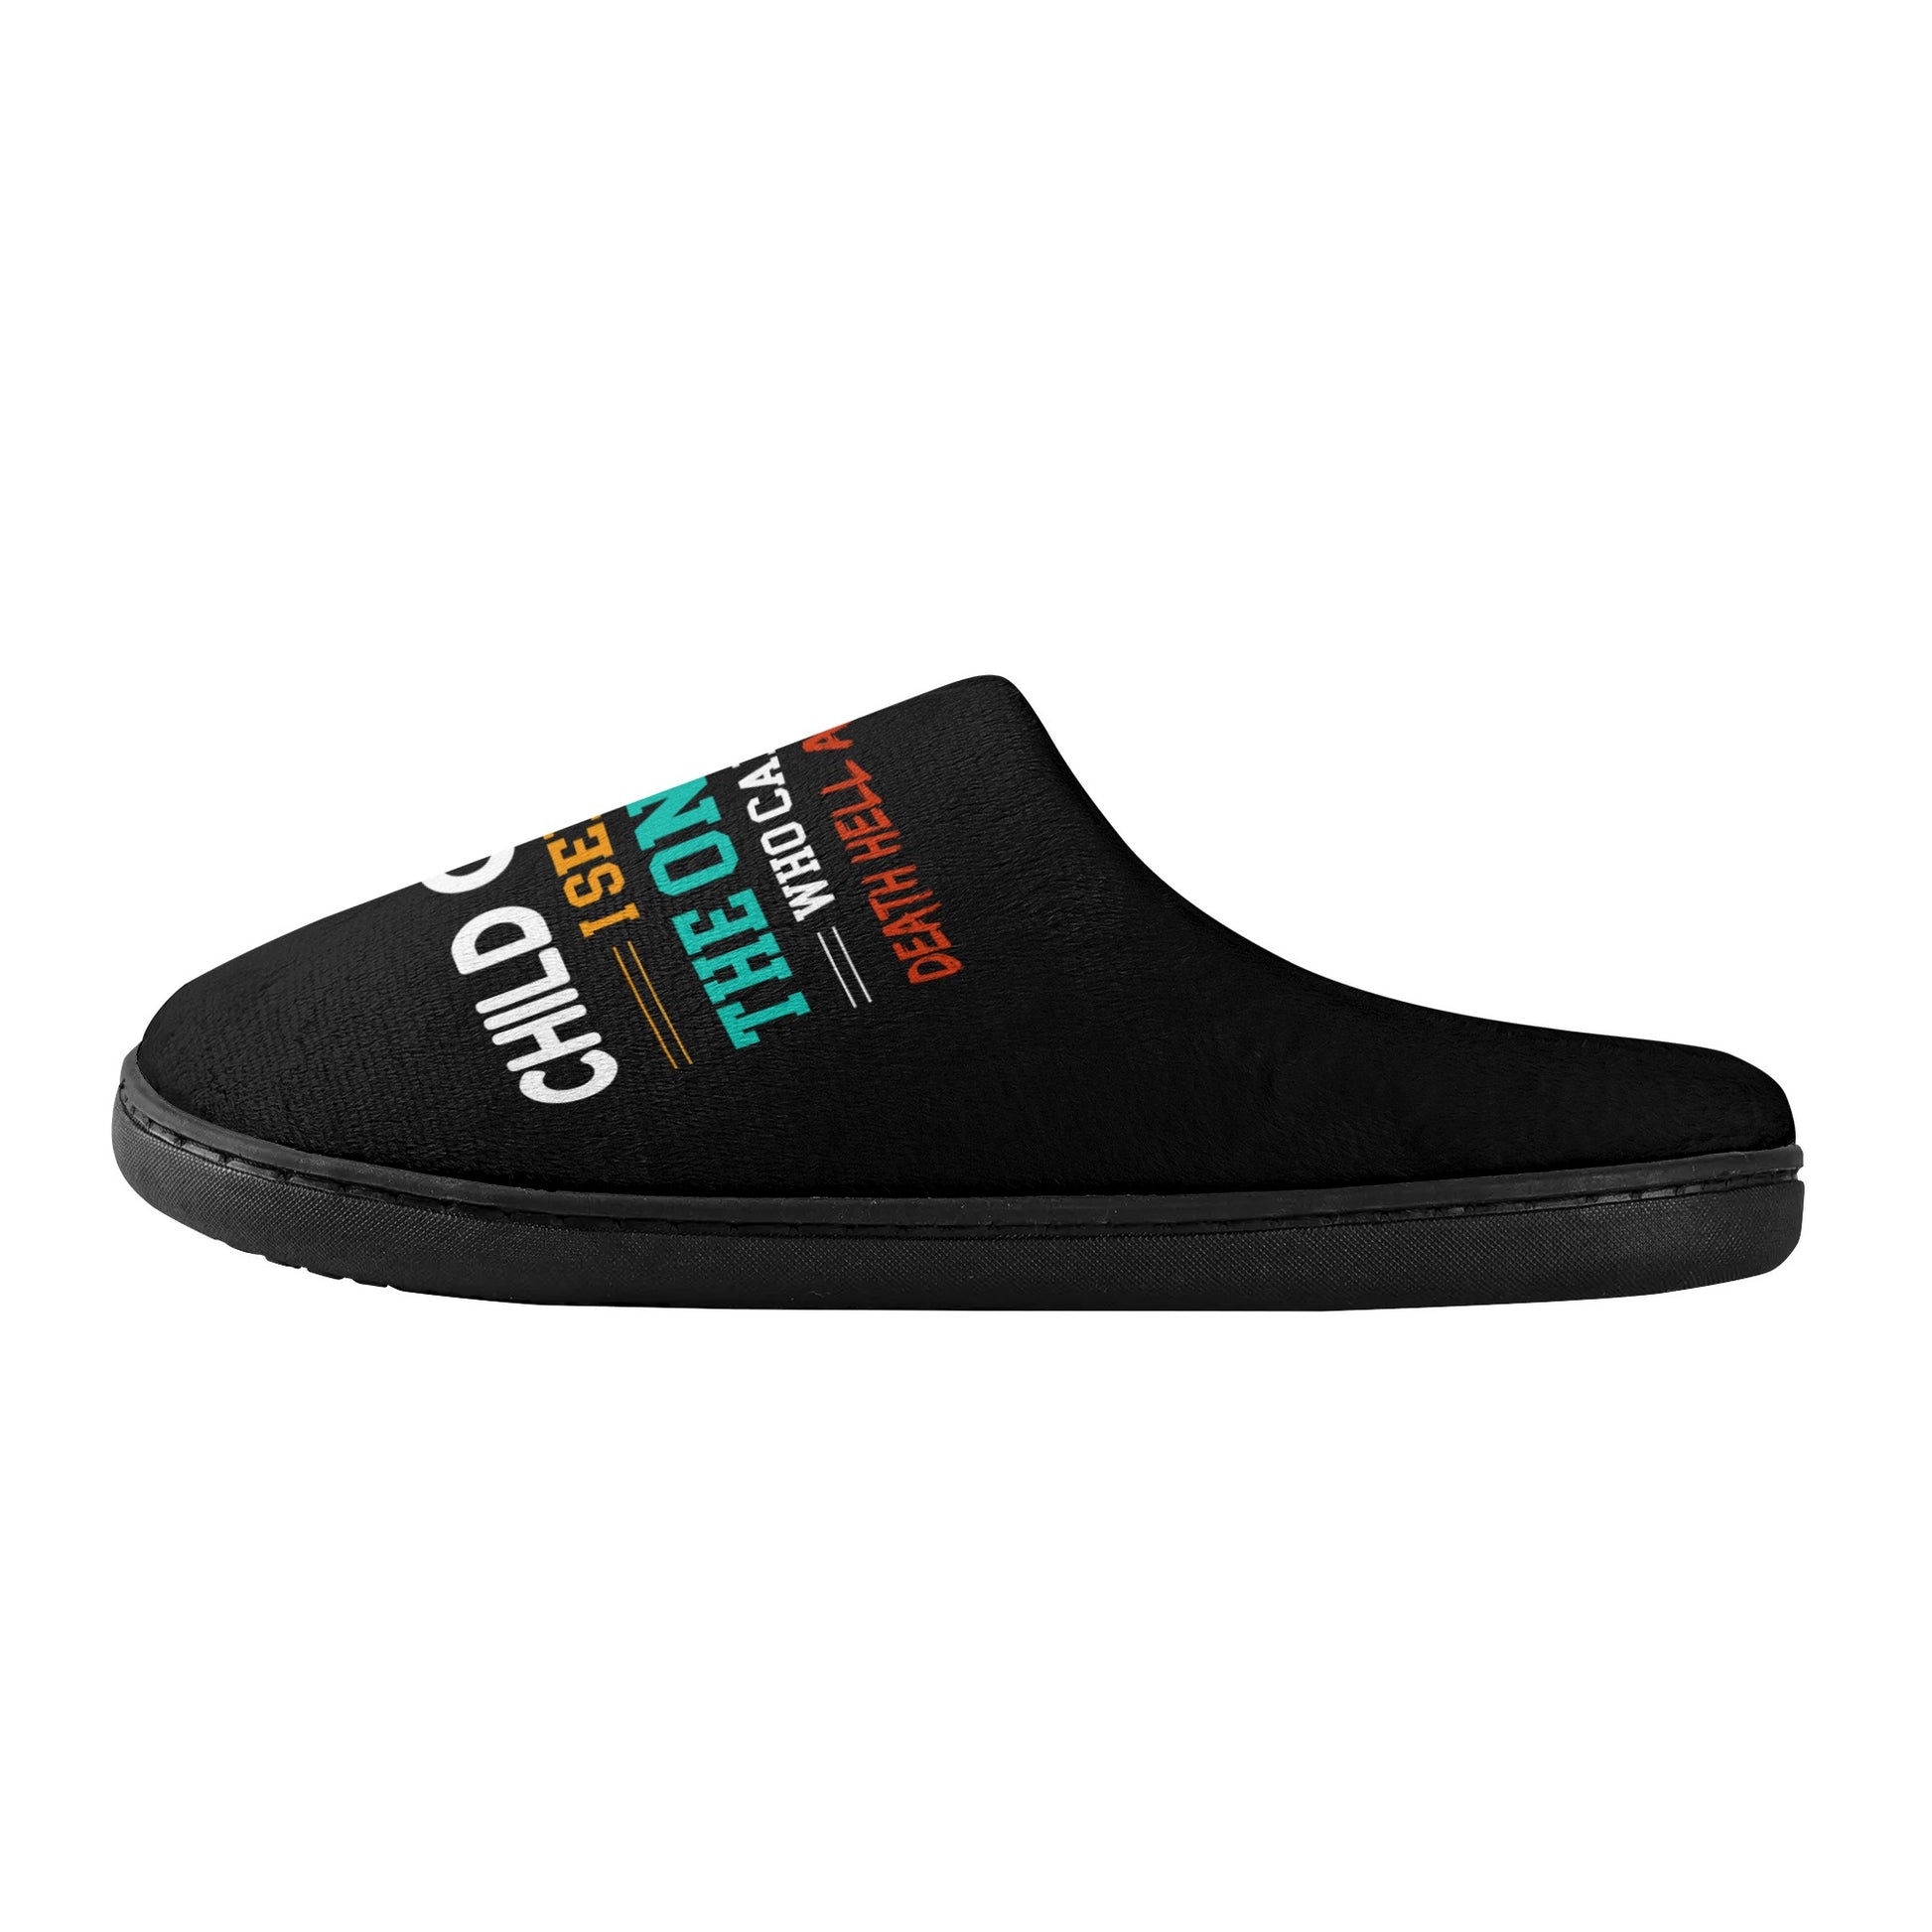 Child Of God I Serve The Only One Who Can Defeat Death Hell And The Grave Unisex Rubber Autumn Christian Slipper Room Shoes popcustoms